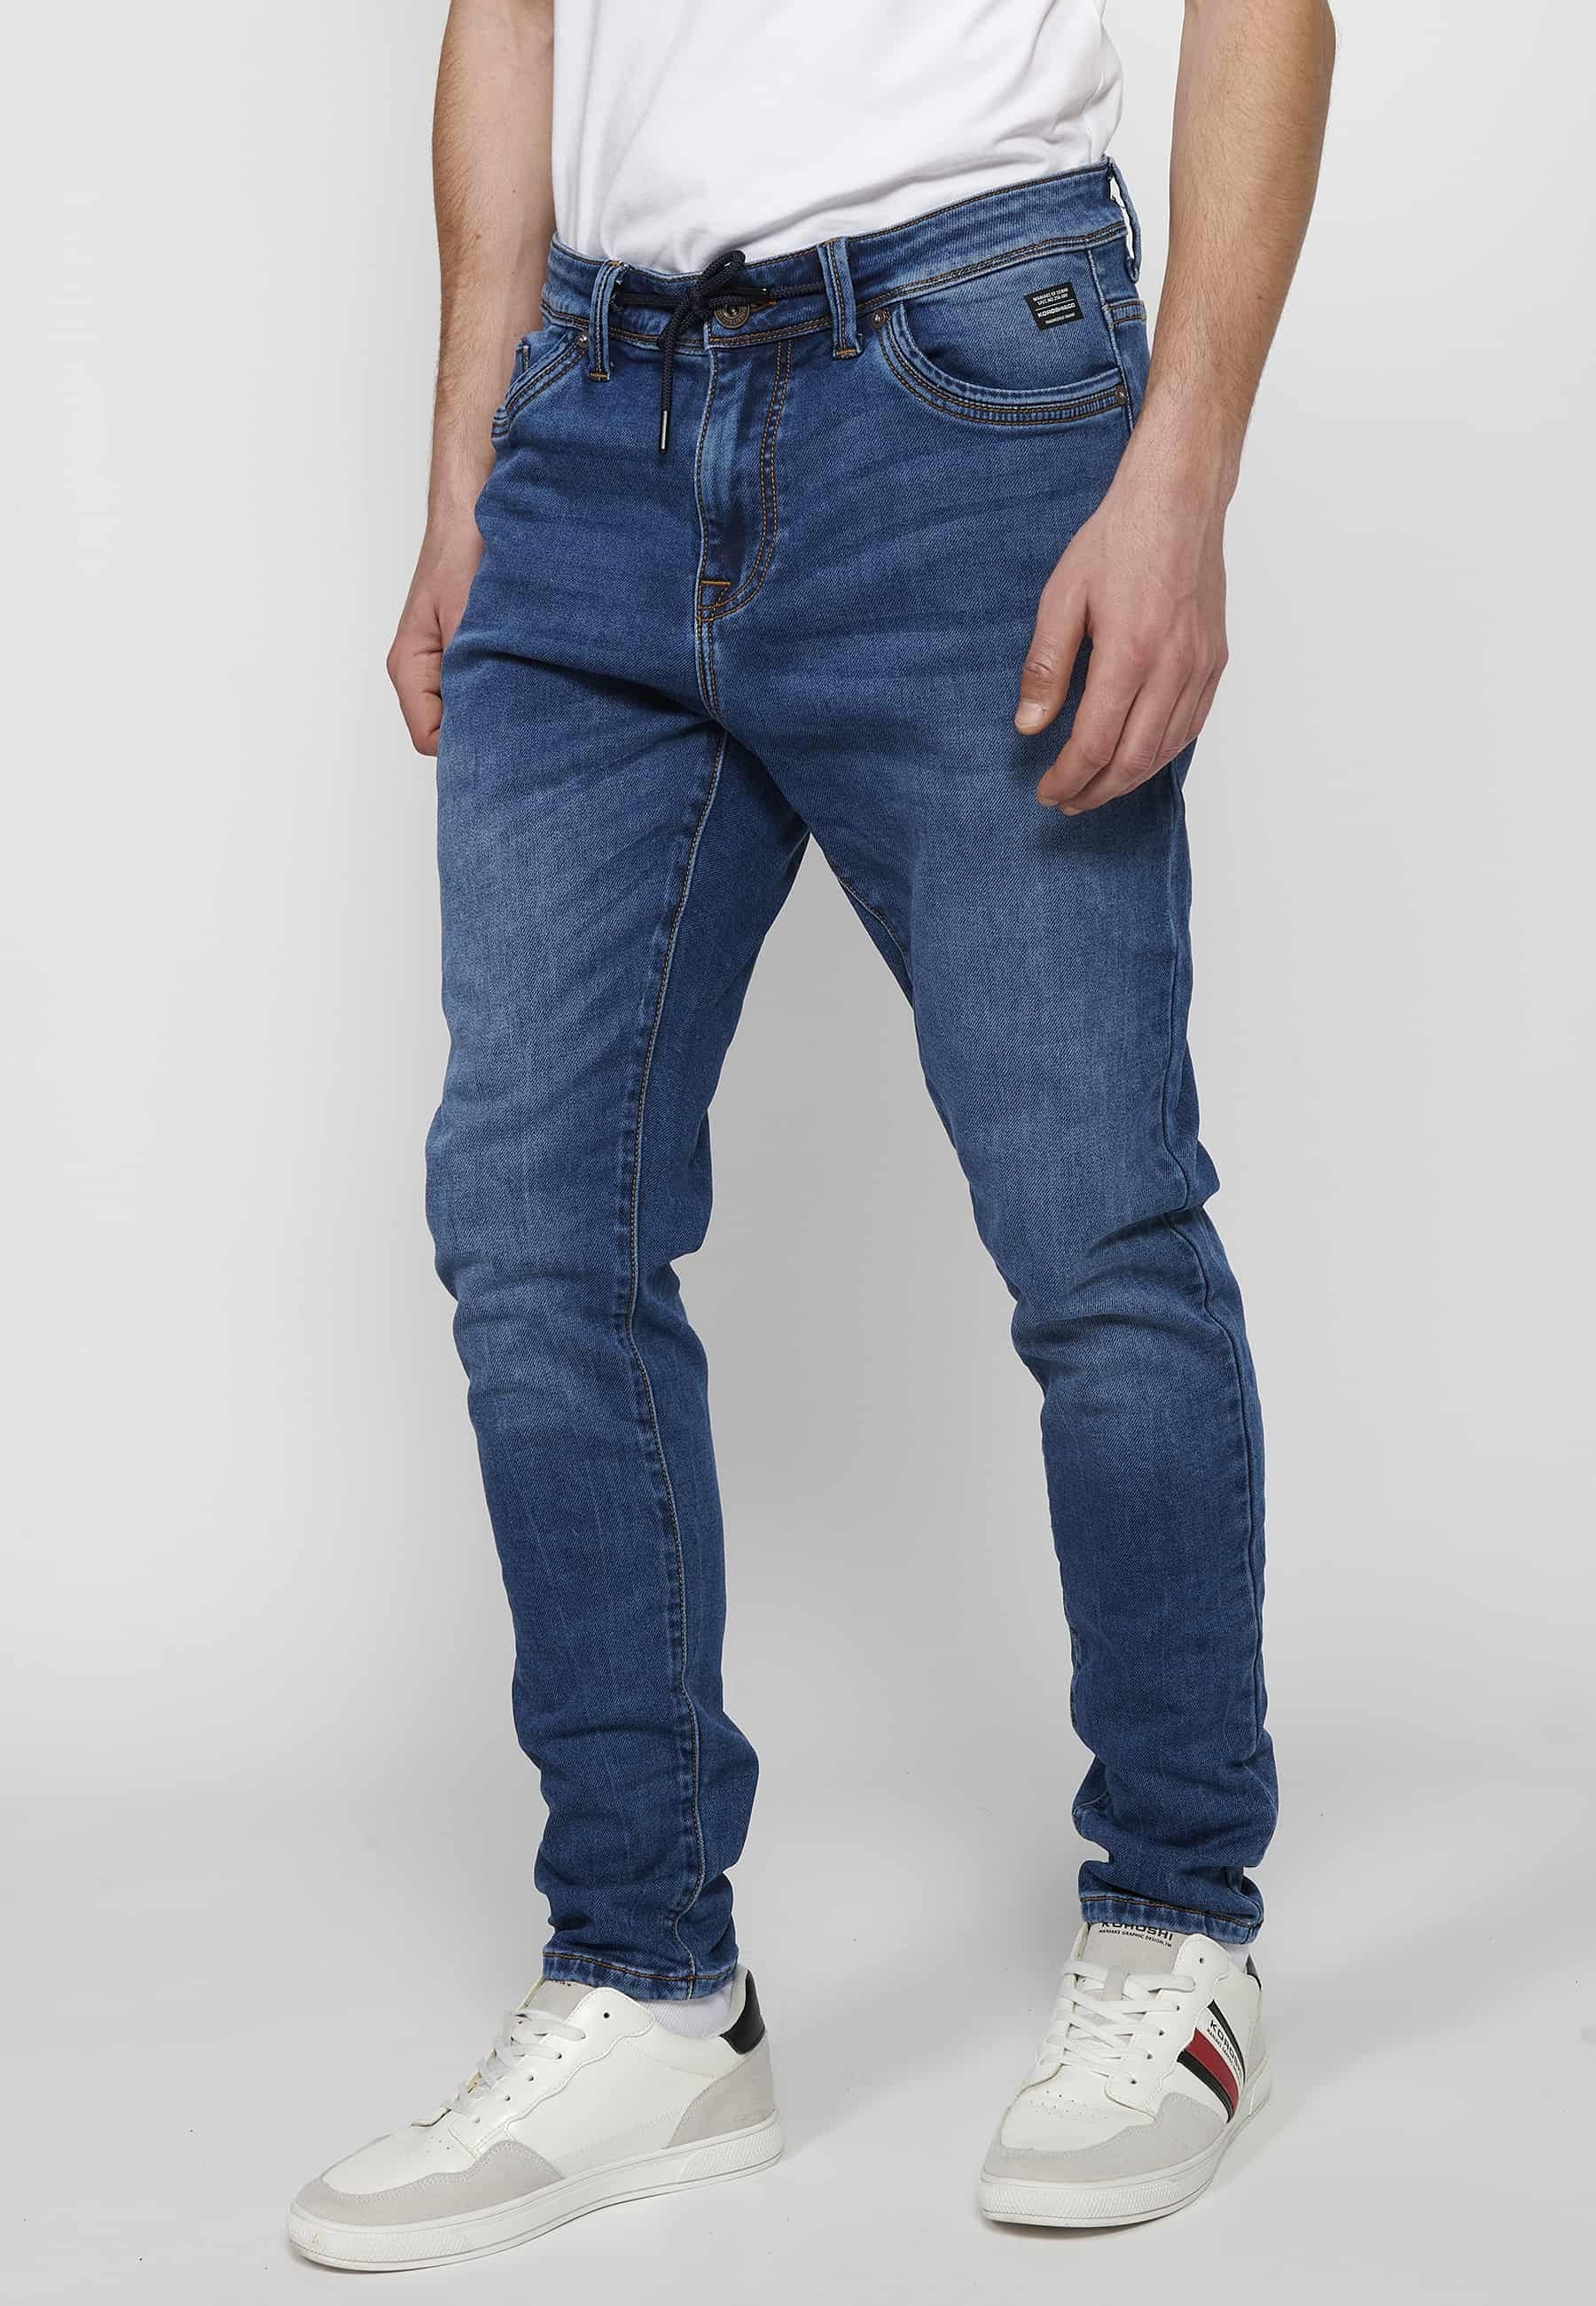 Long low rise slim fit jeans with front closure with zipper and button in Blue for Men 4